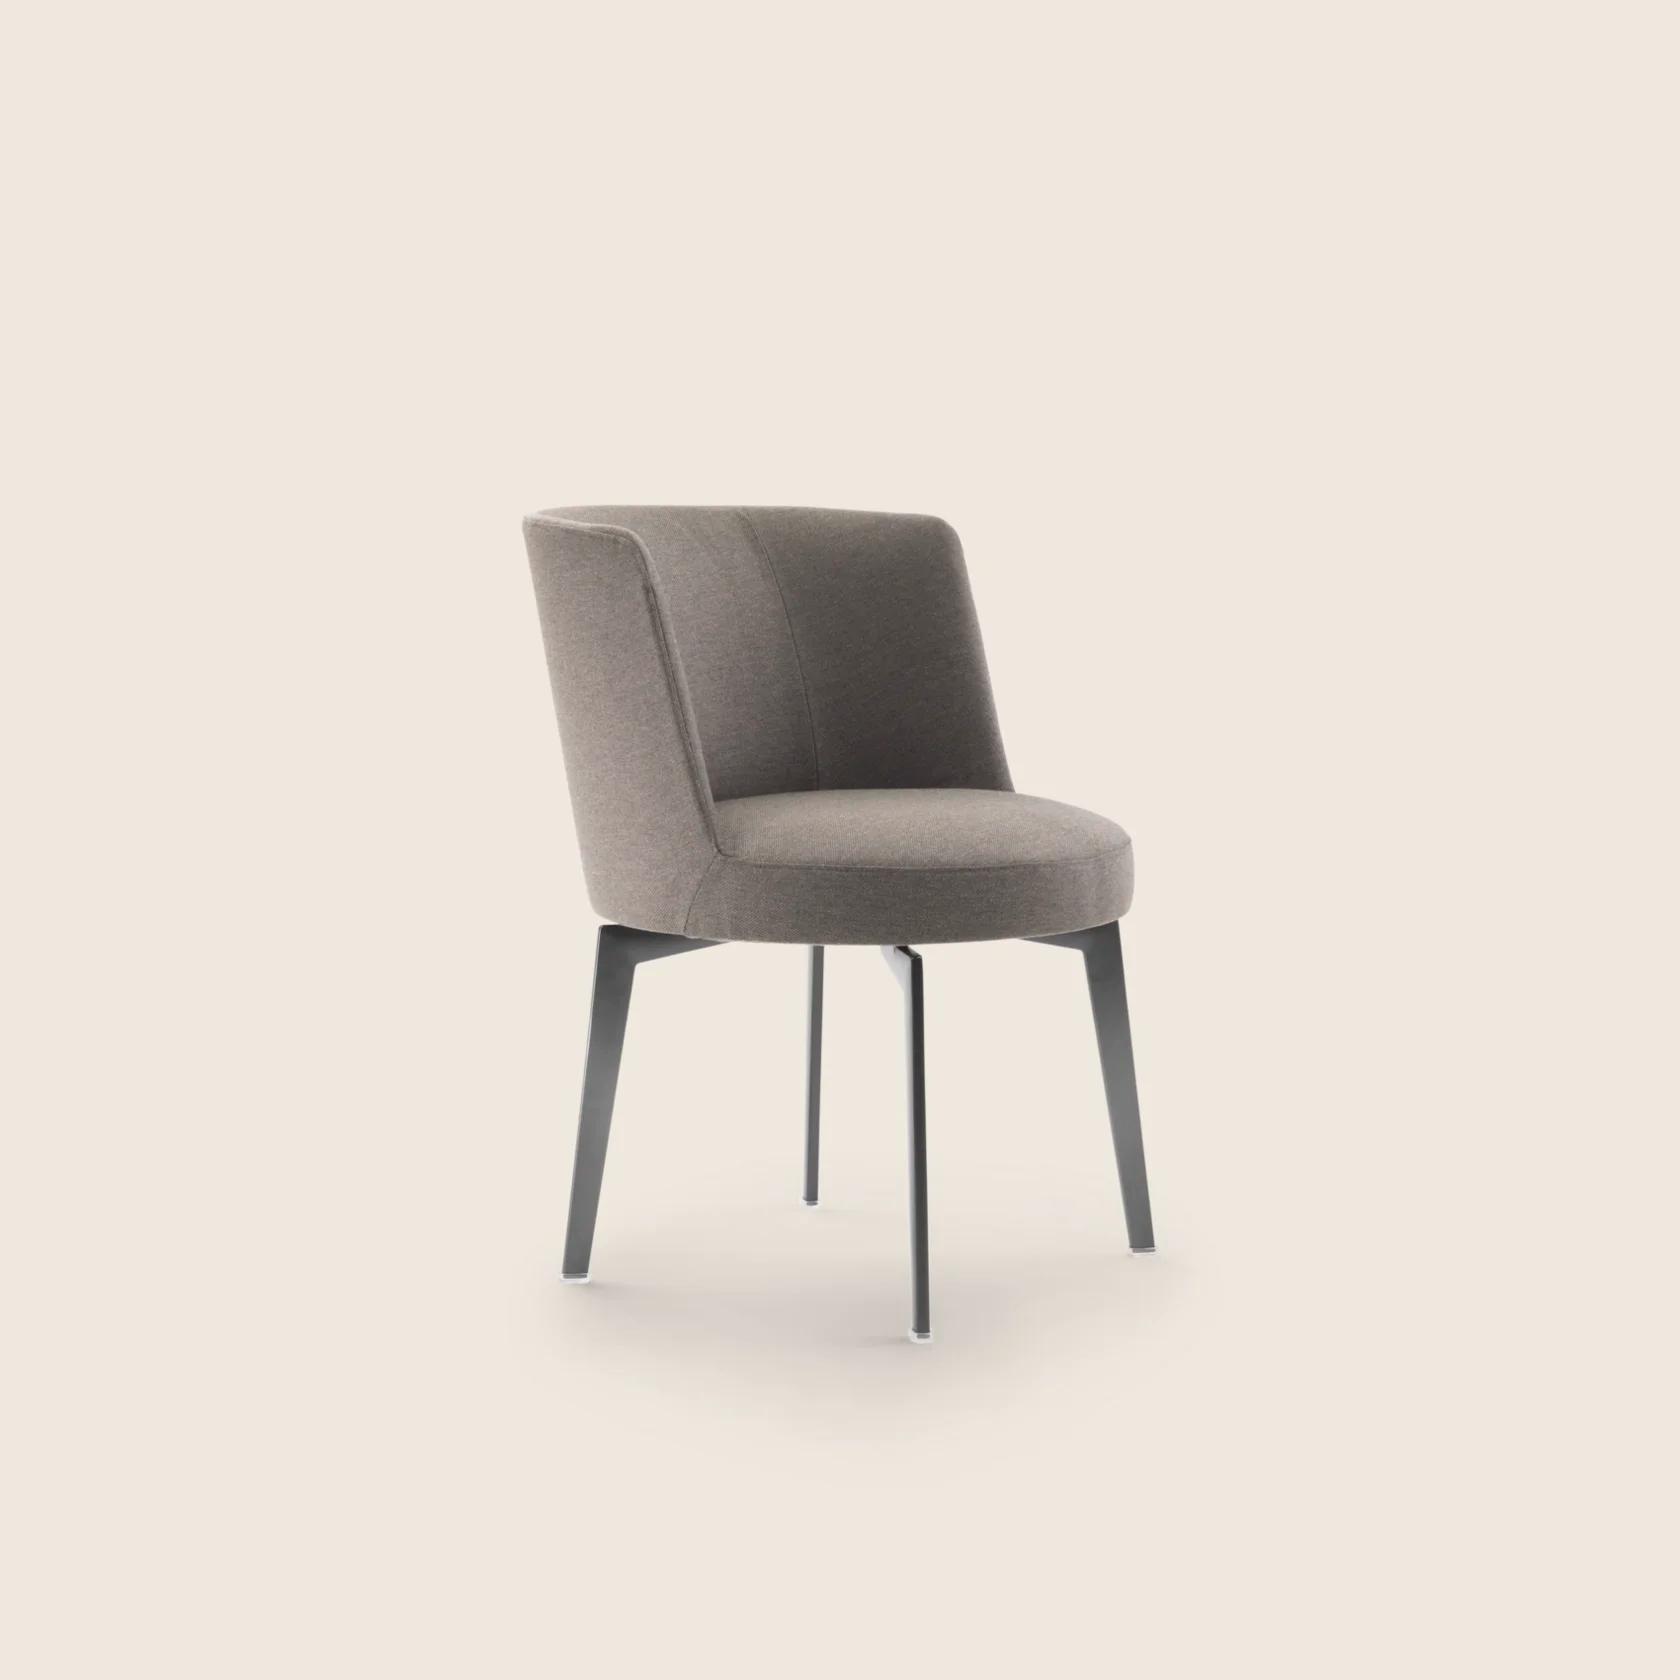 024601_HERA_CHAIR_05.png